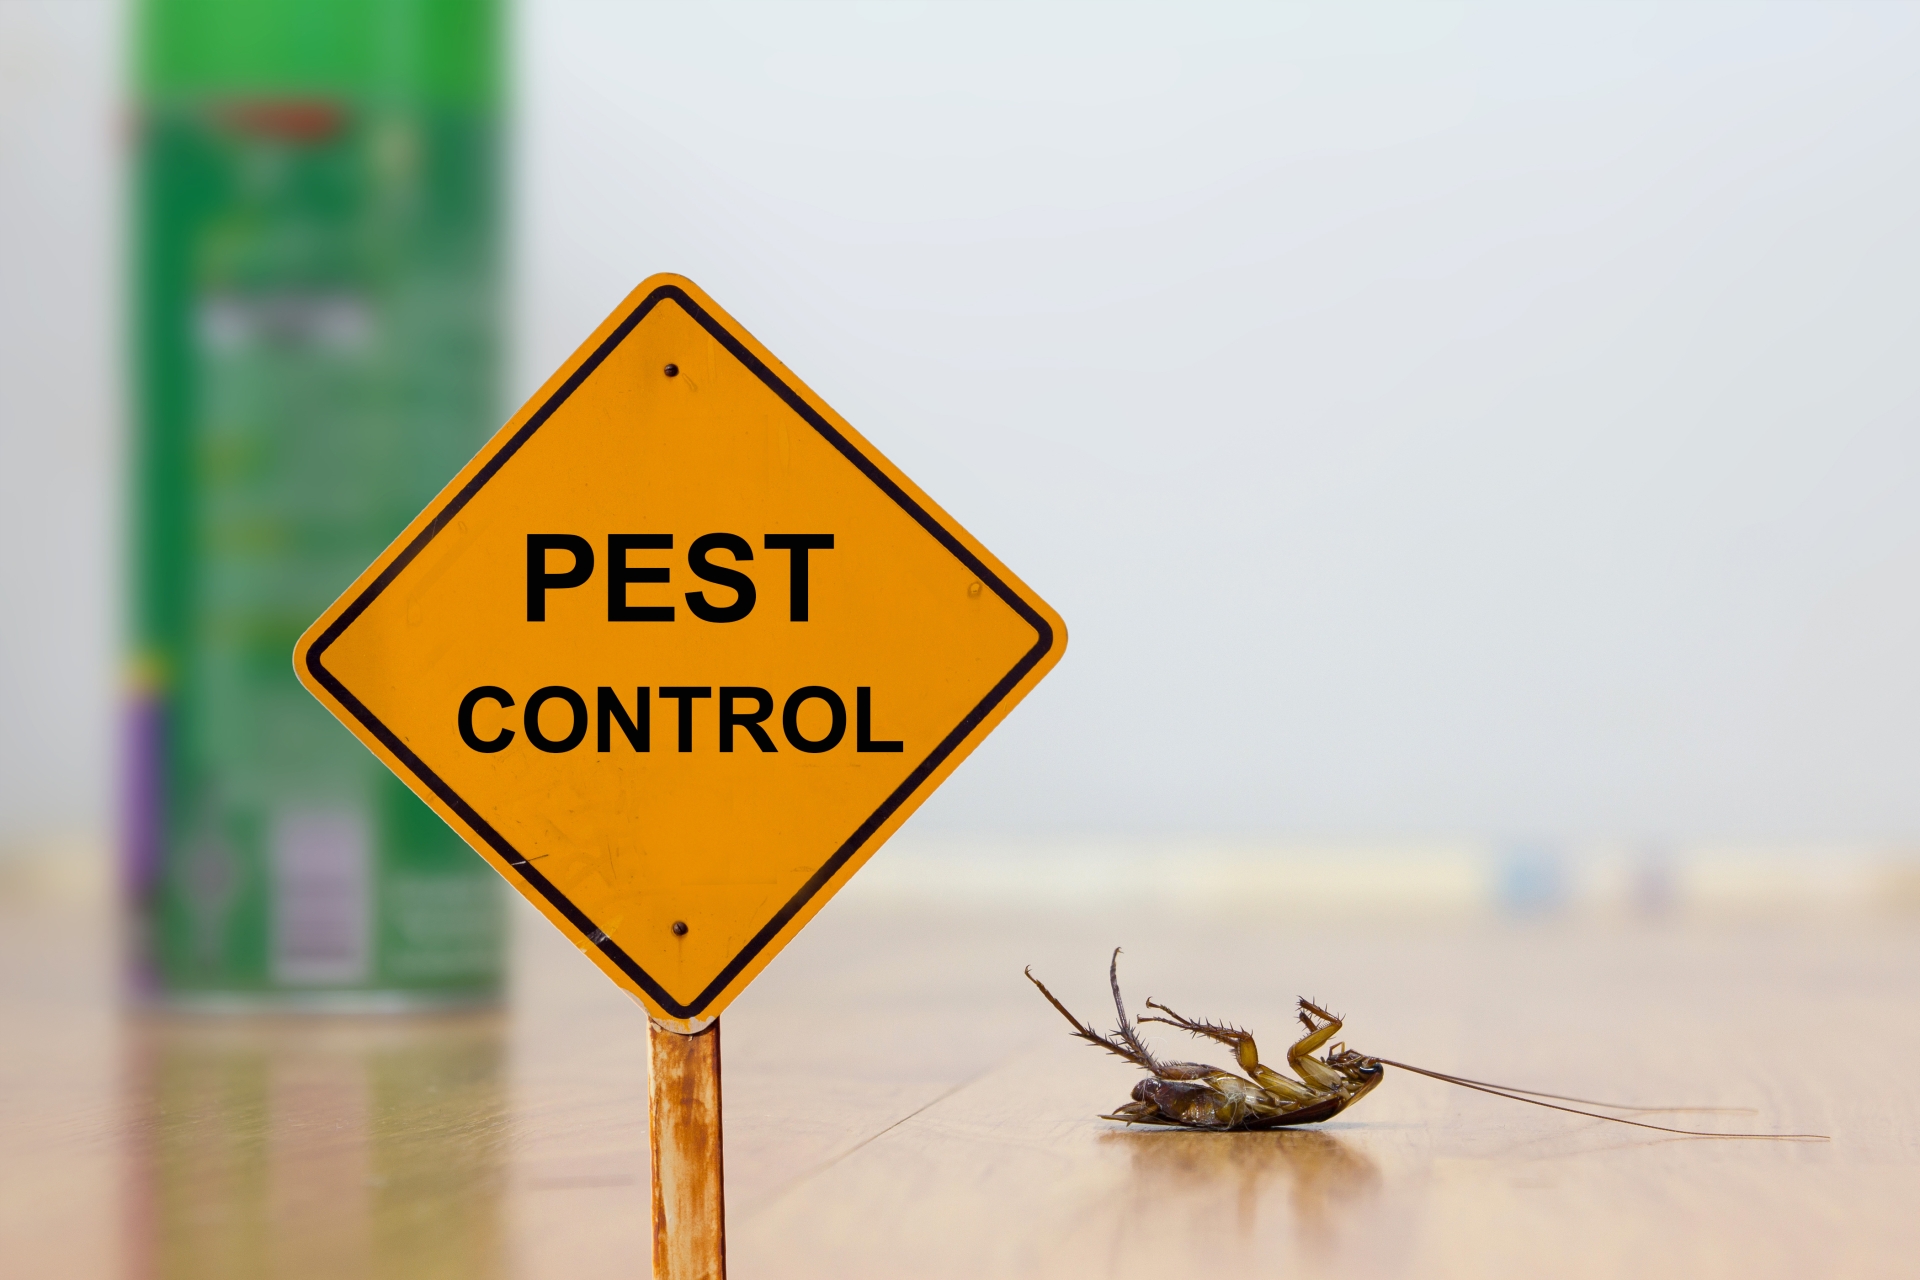 24 Hour Pest Control, Pest Control in Great Bookham, Little Bookham, KT23. Call Now 020 8166 9746